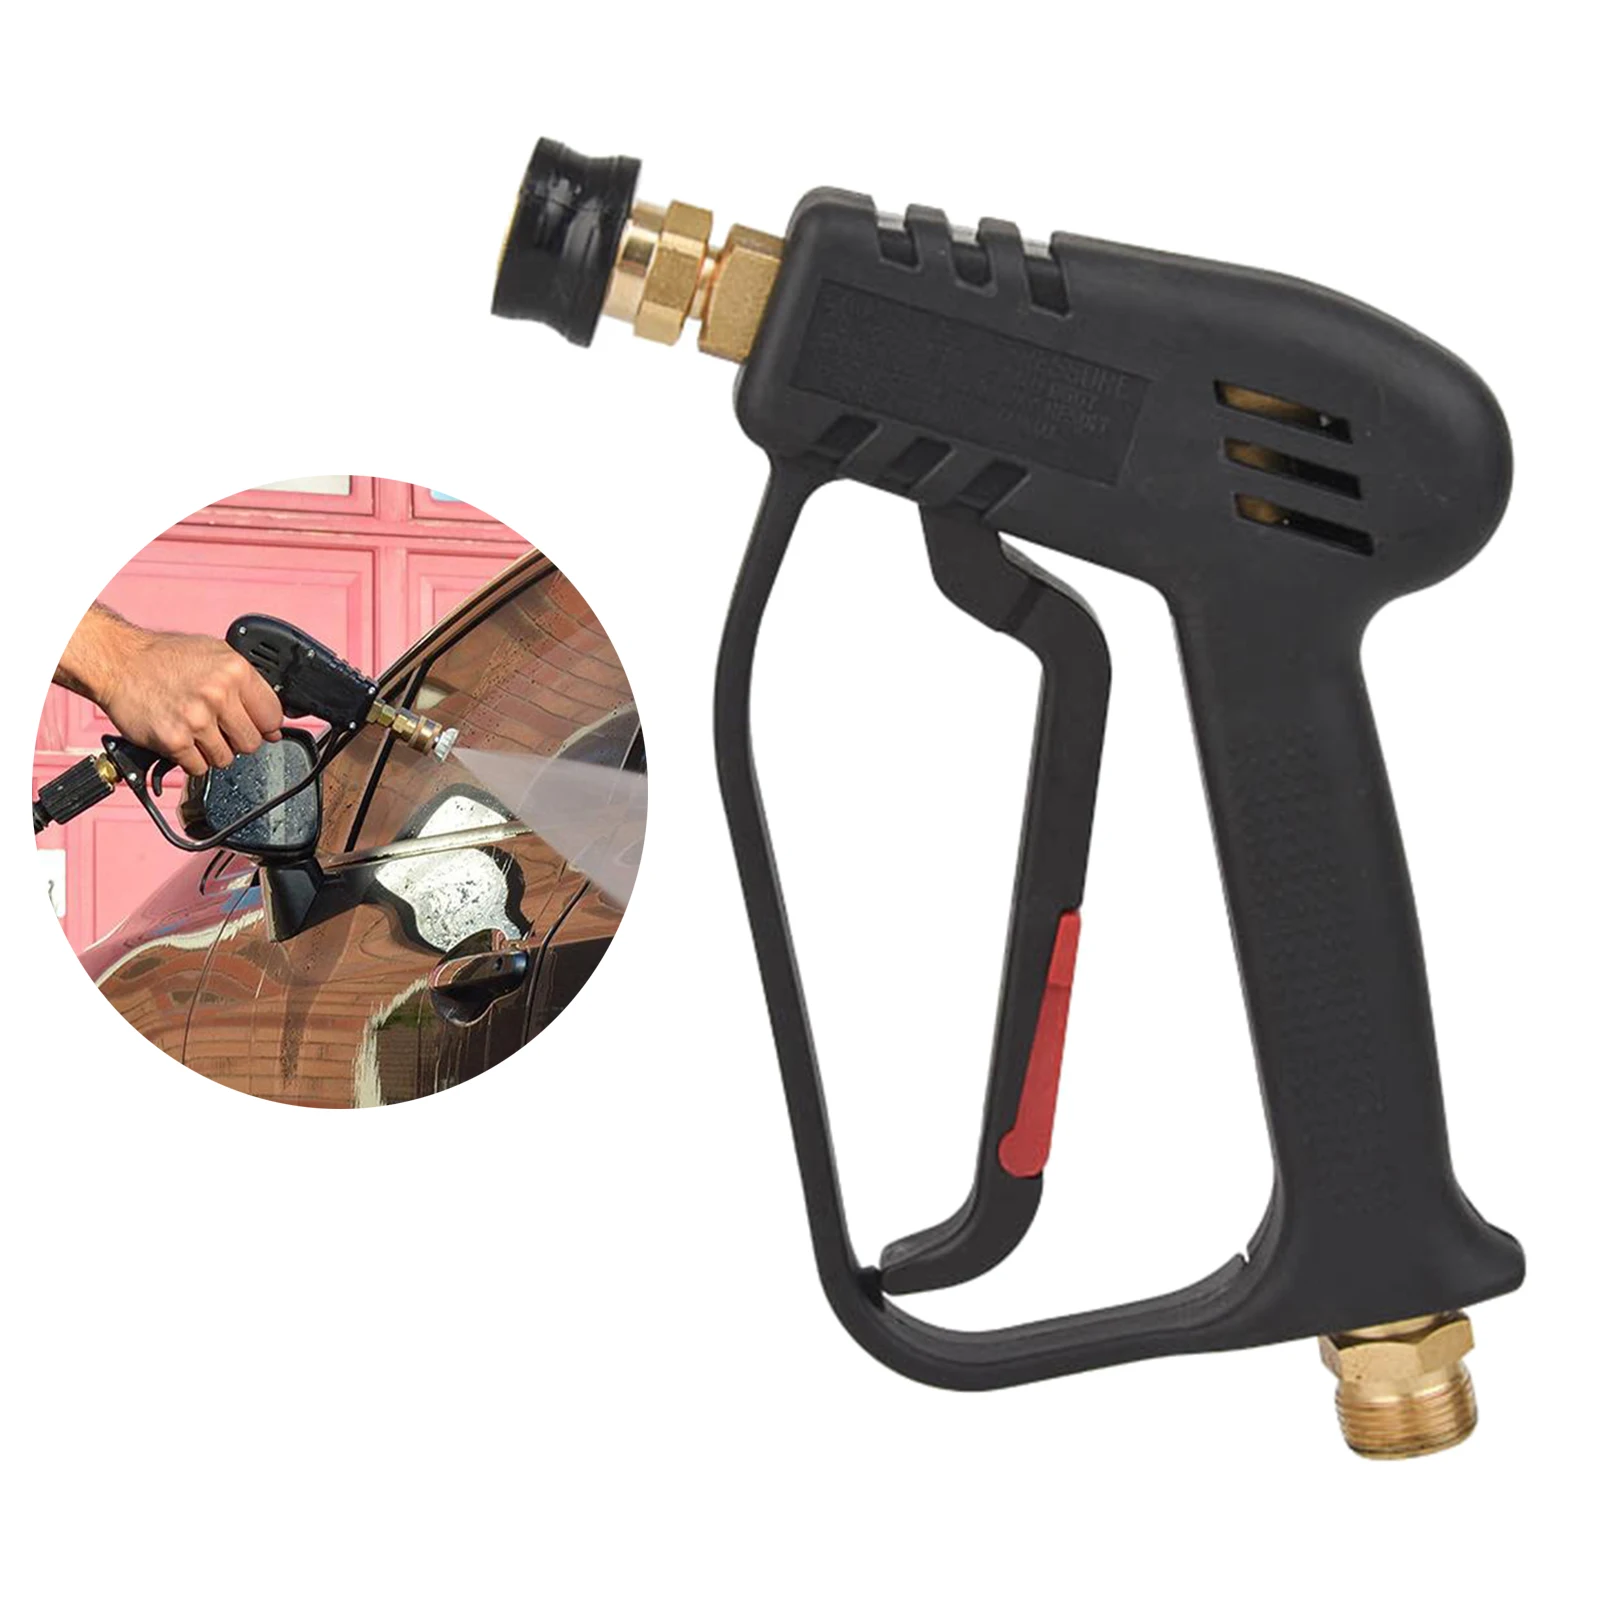 

High Pressure Washer Gun,4000 PSI Max, 5 Color Quick Connect Nozzles(Optional), M22-14 Hose Connector Nozzles Tips